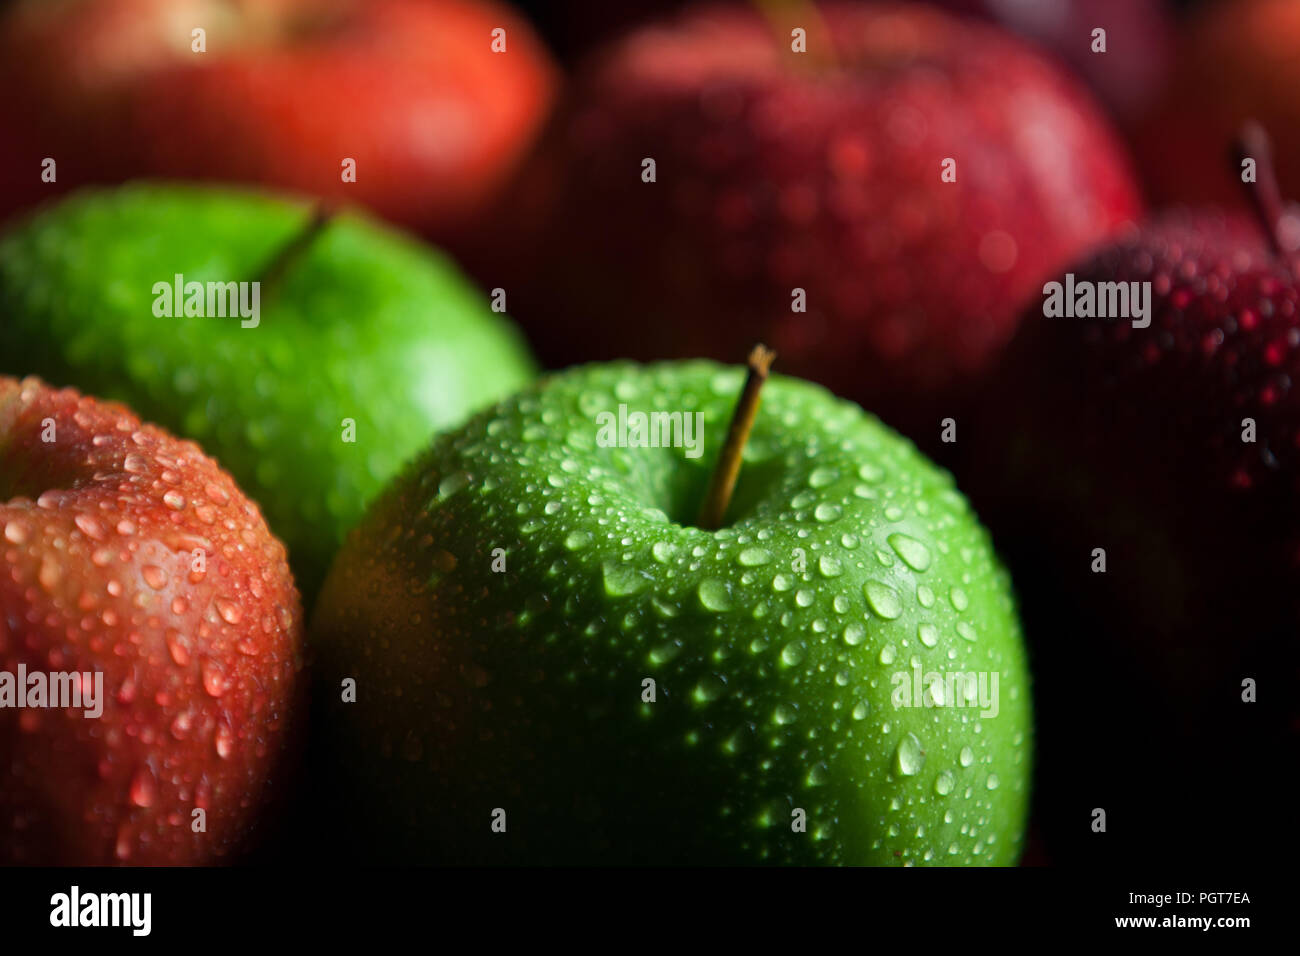 Granny smith and red delicious apples with water droplets and dark shadows Stock Photo